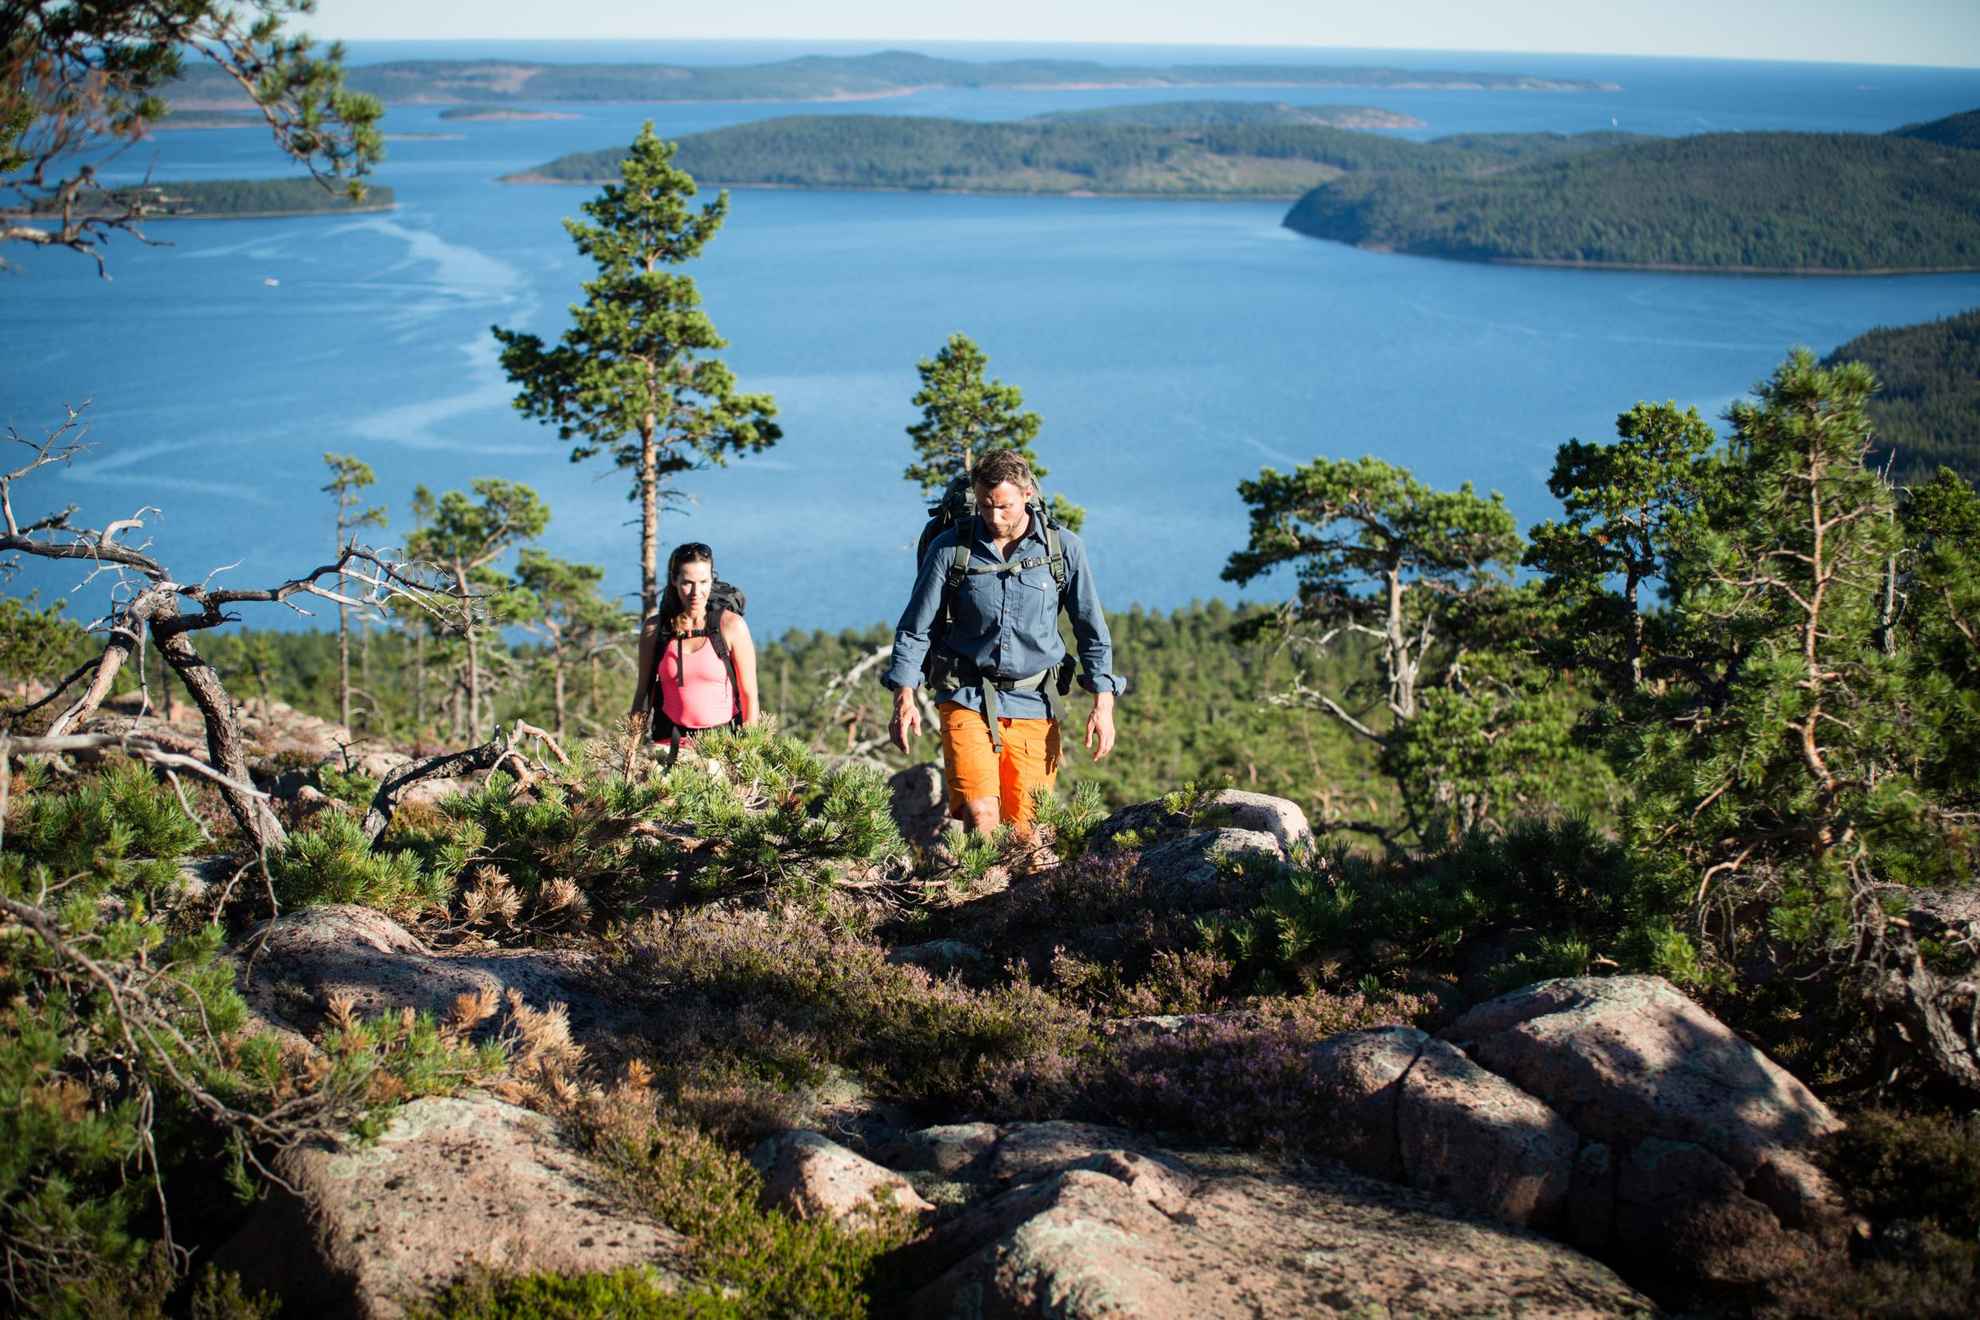 A man and a woman hiking up one of the slopes of the High Coast in Sweden, with the forest-rich landscape and the Baltic Sea in the background.